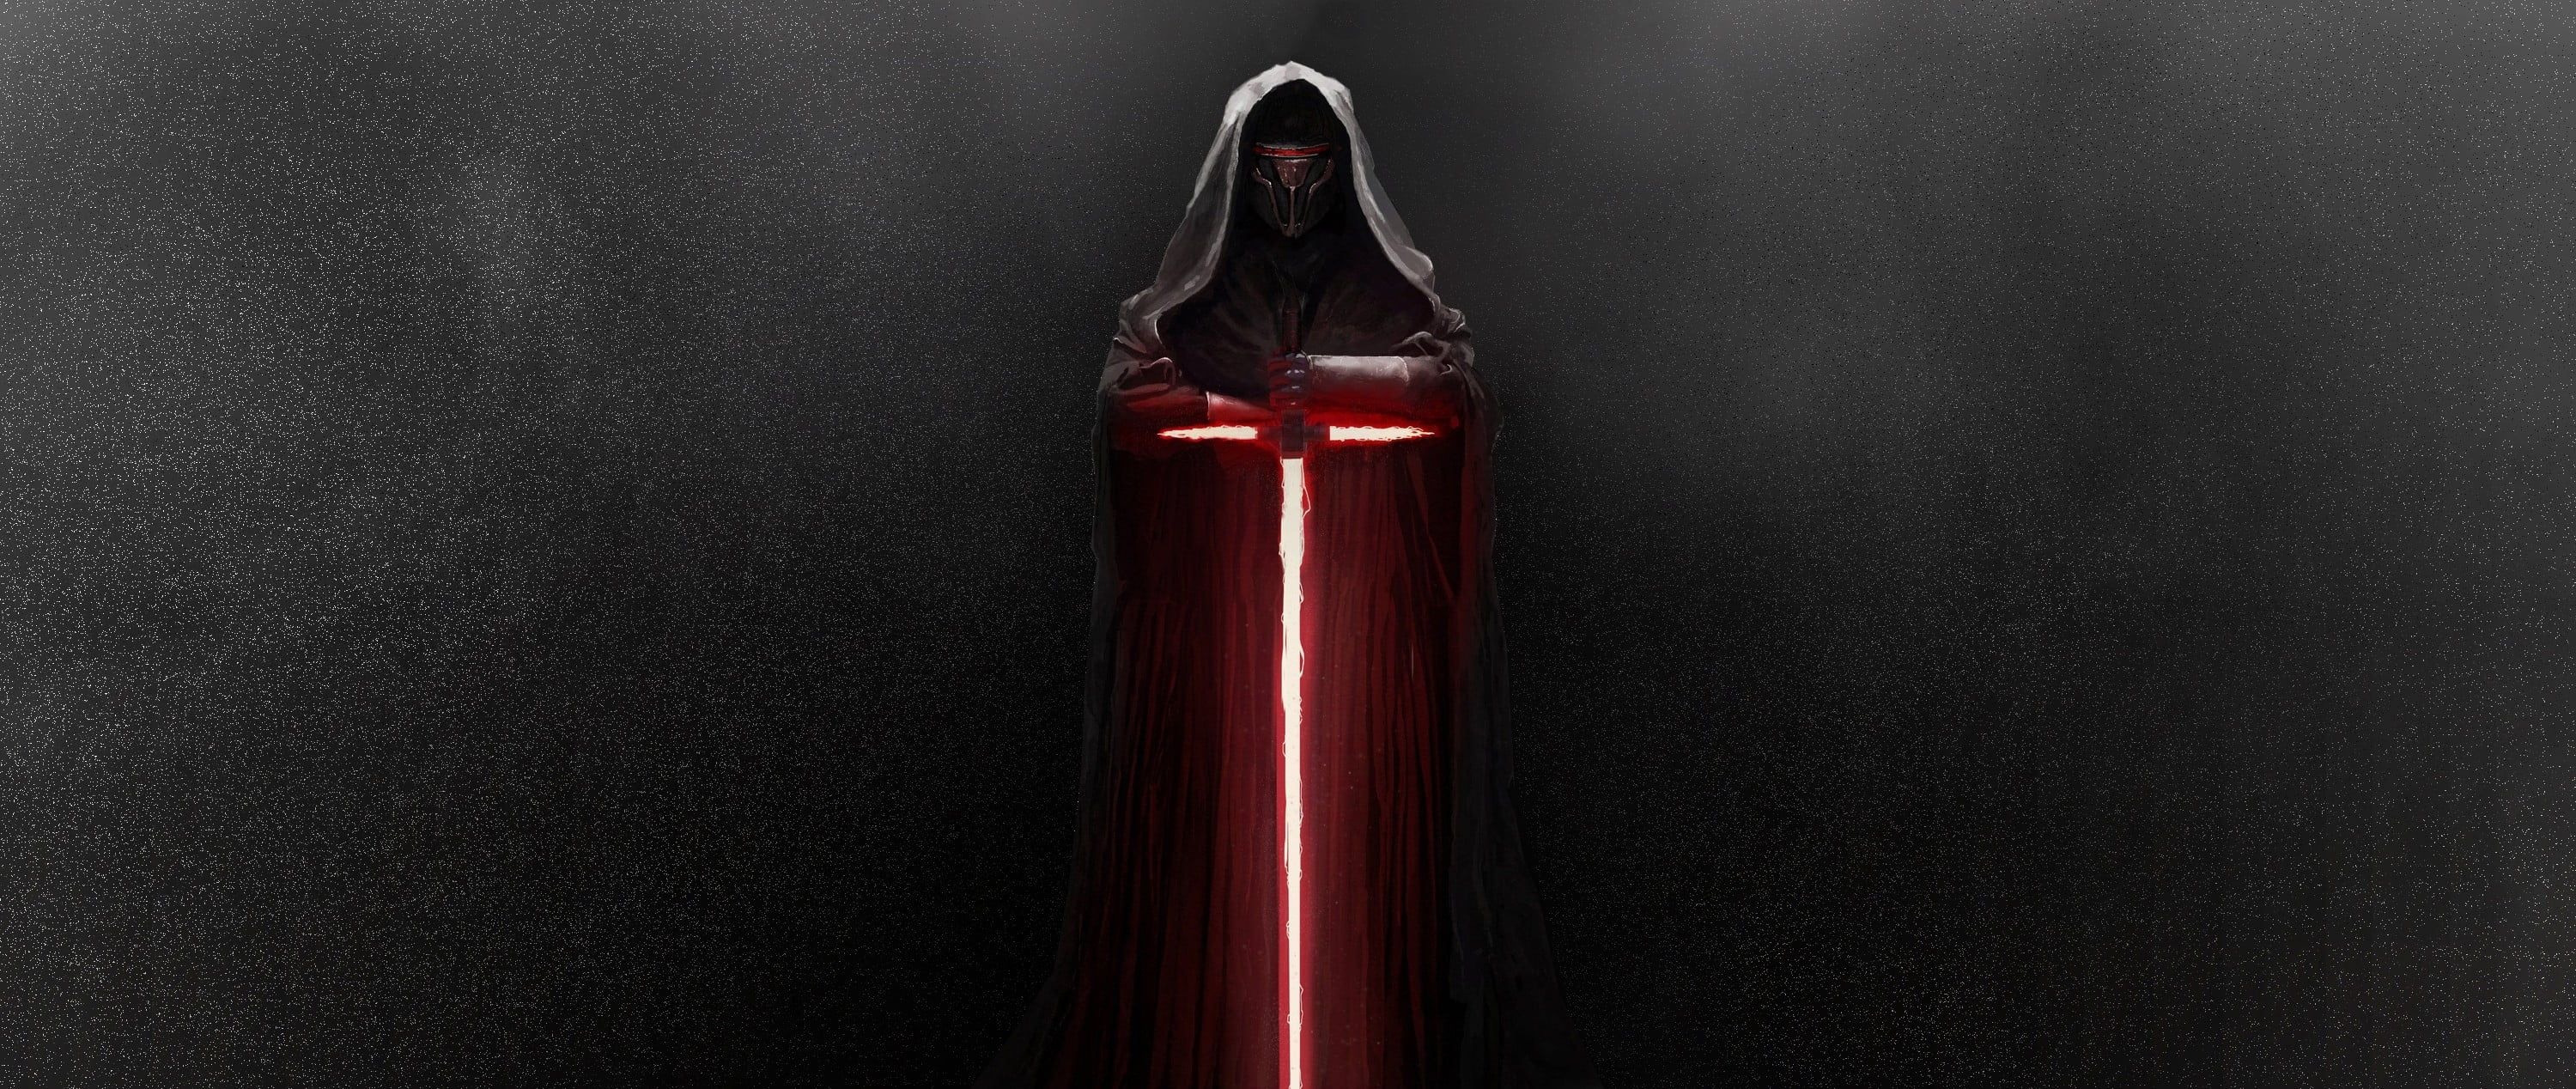 Darth Revan: A Sith Lord and the namesake of the Sith Eternal army's 3rd Legion. 3000x1270 Dual Screen Wallpaper.